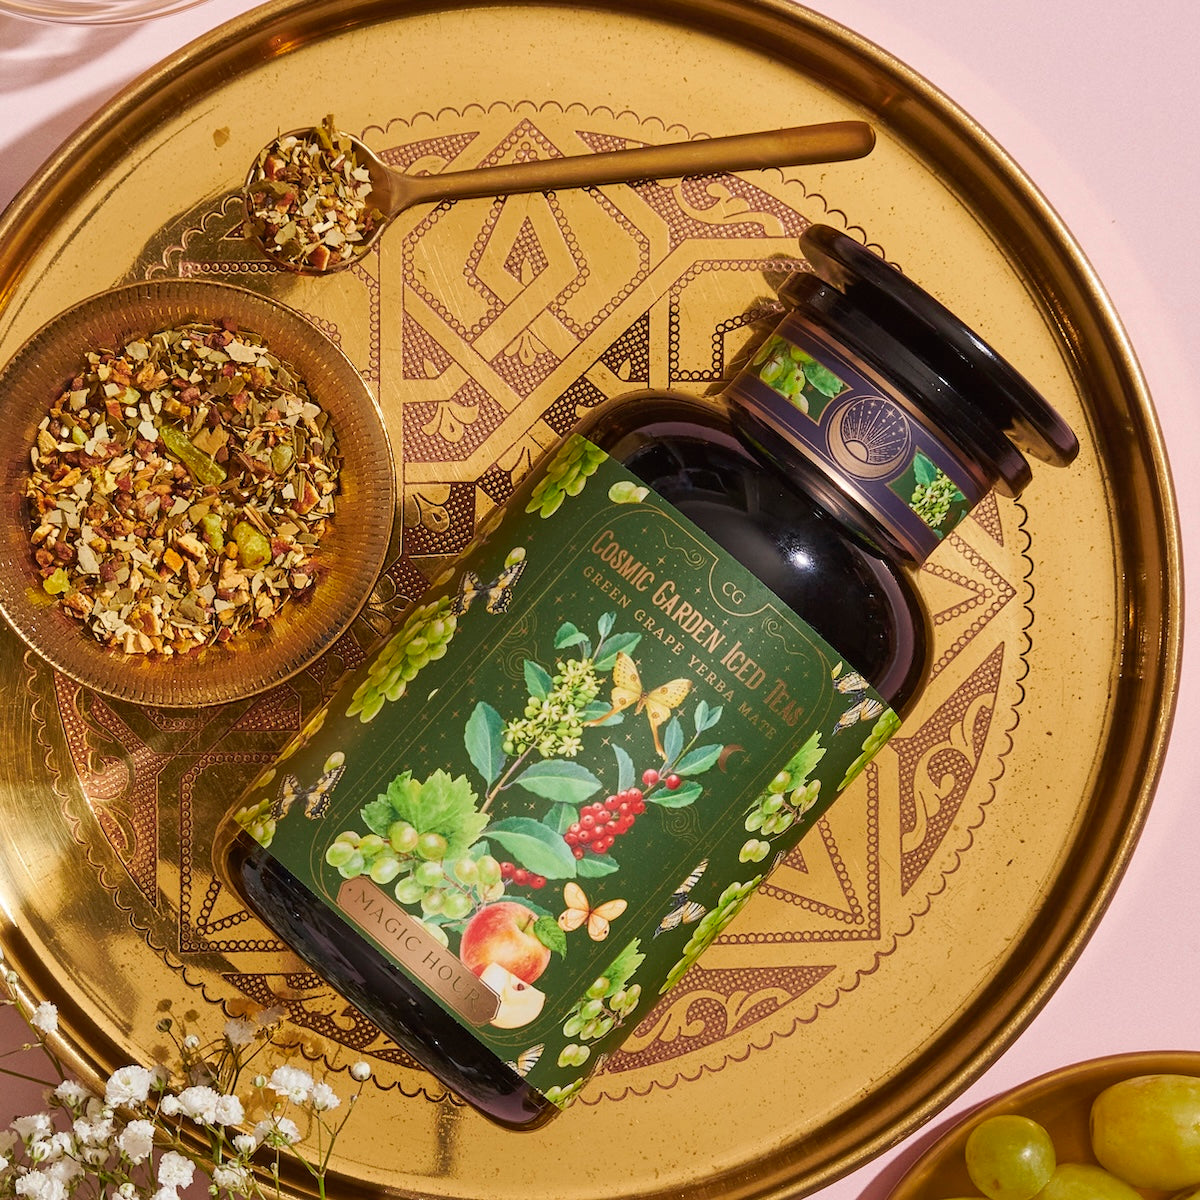 A decorative gold tray holds a dark green bottle of organic tea labeled &quot;Green Grape Yerba Mate: Cosmic Garden Iced Tea&quot; by Magic Hour, with images of flowers, herbs, and fruits. The tray also has a small wooden bowl filled with loose tea leaves and a gold spoon resting beside it.